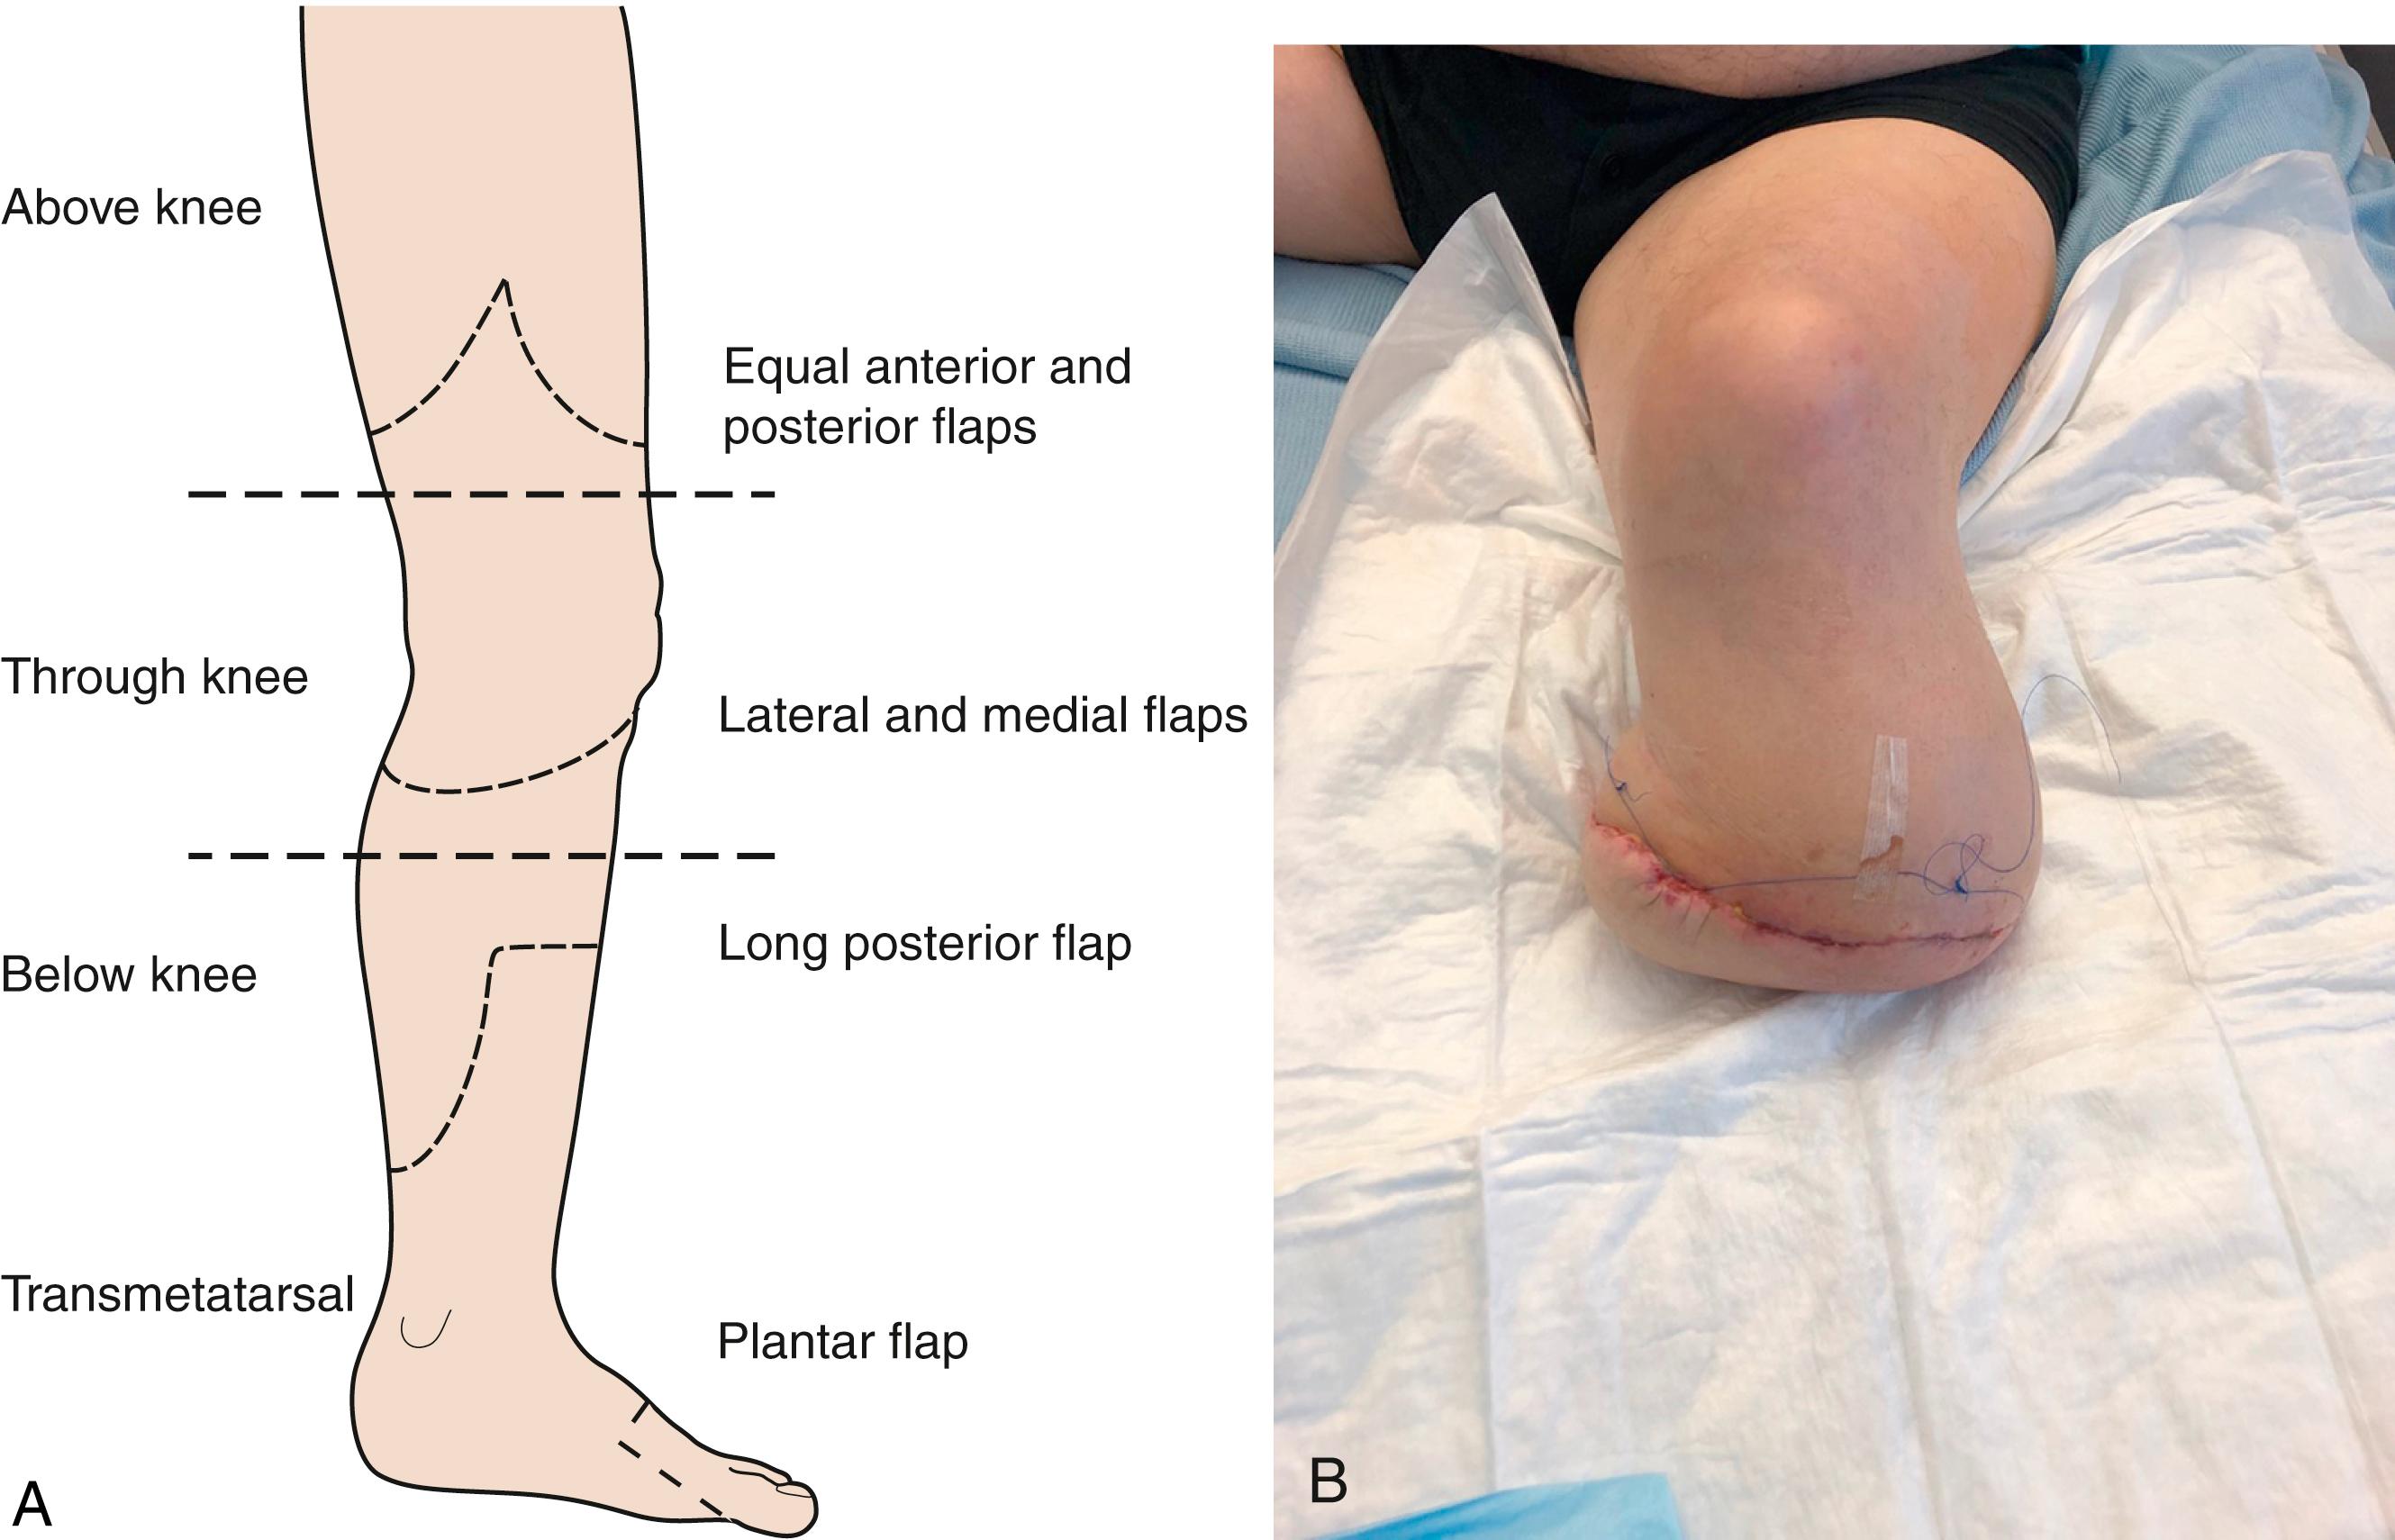 Fig. 22.13, Amputation. (A) Levels of amputation and types of flaps used to close the residual defect. (B) Below-knee amputation.